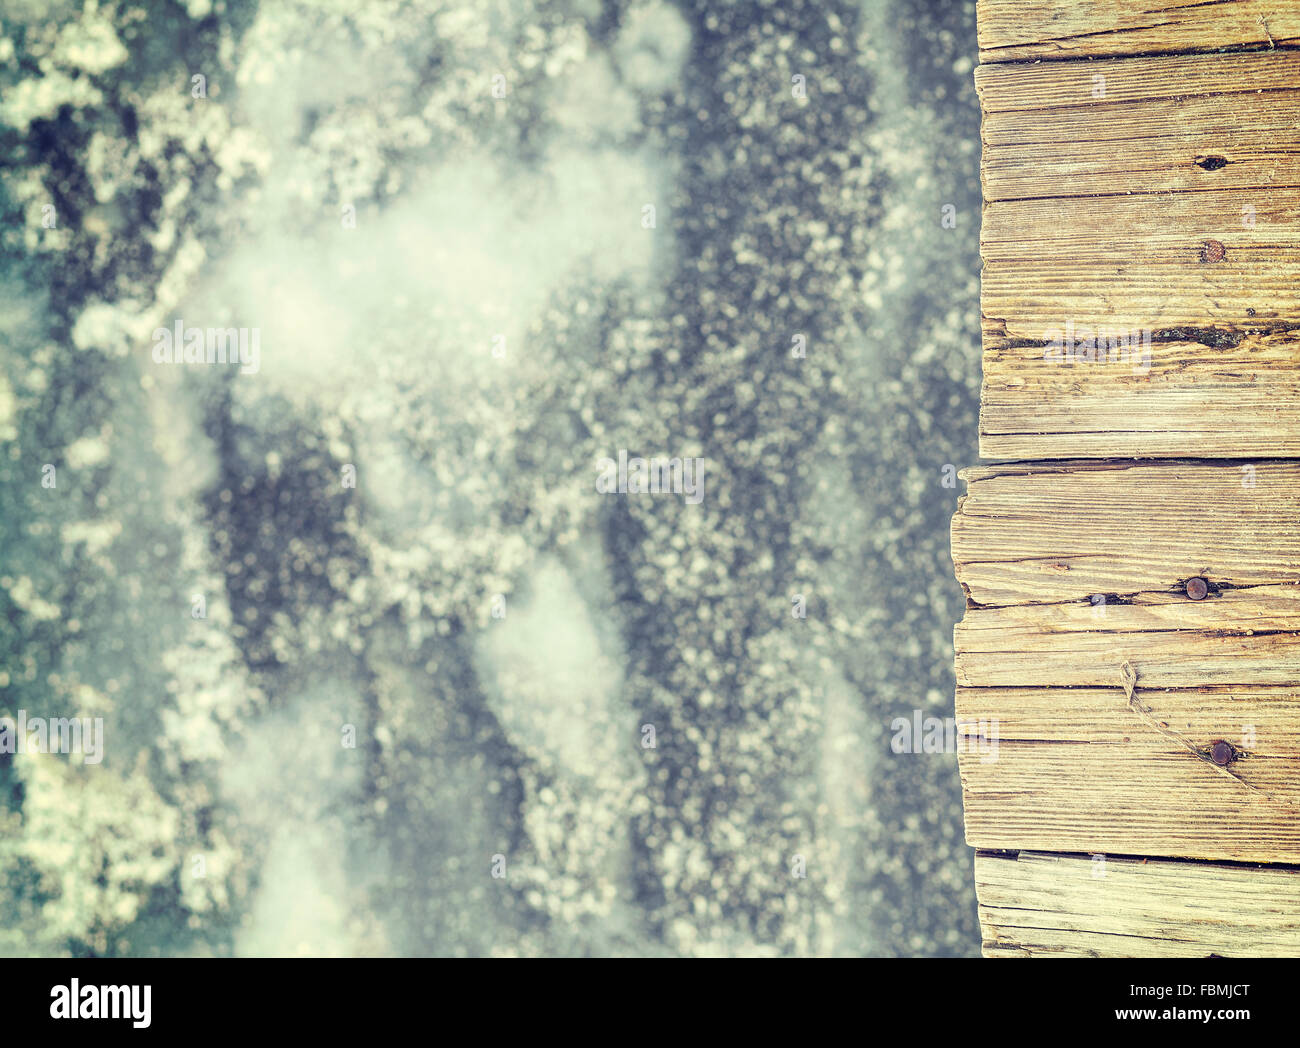 Retro toned old wooden pier on ice, abstract background. Stock Photo